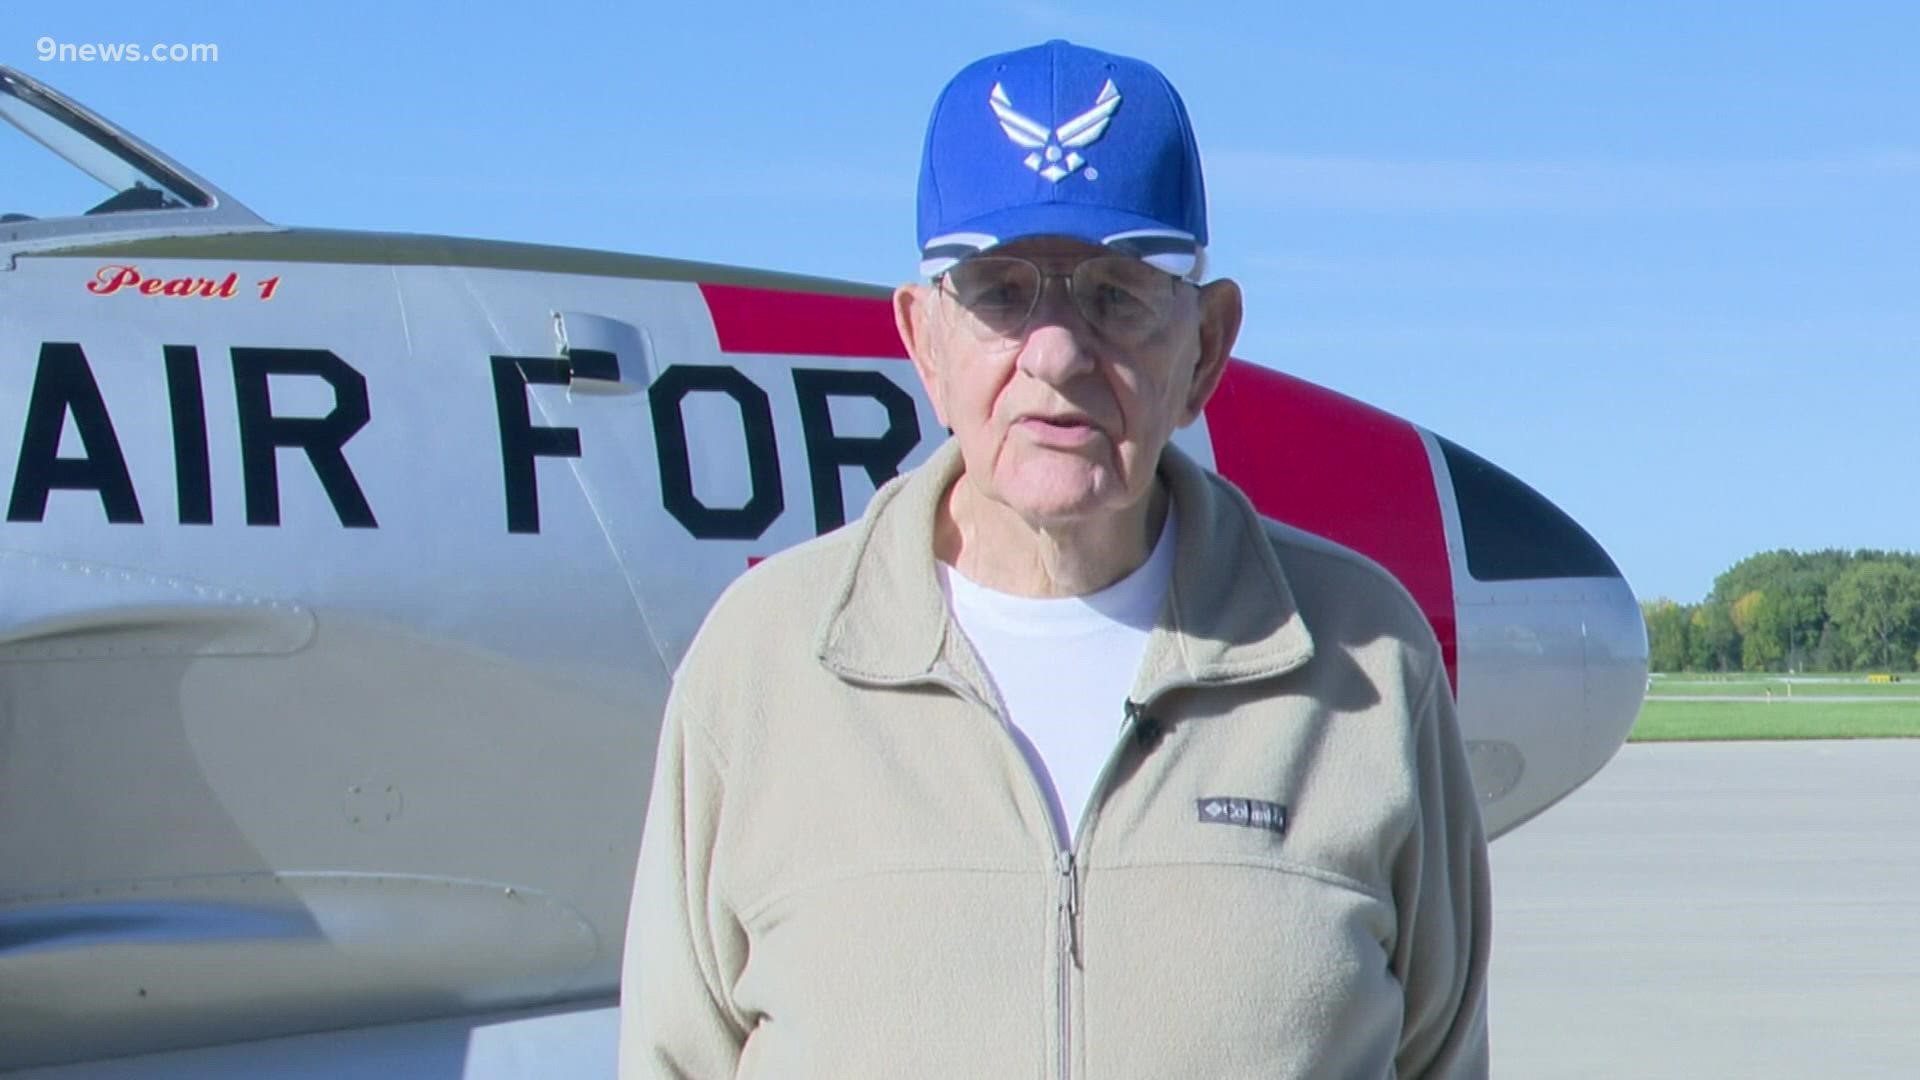 At 90 years old, Vietnam combat pilot Clyde Bridger of Wisconsin returned to the cockpit of a T-33 fighter jet--the same kind he flew 65 years ago.